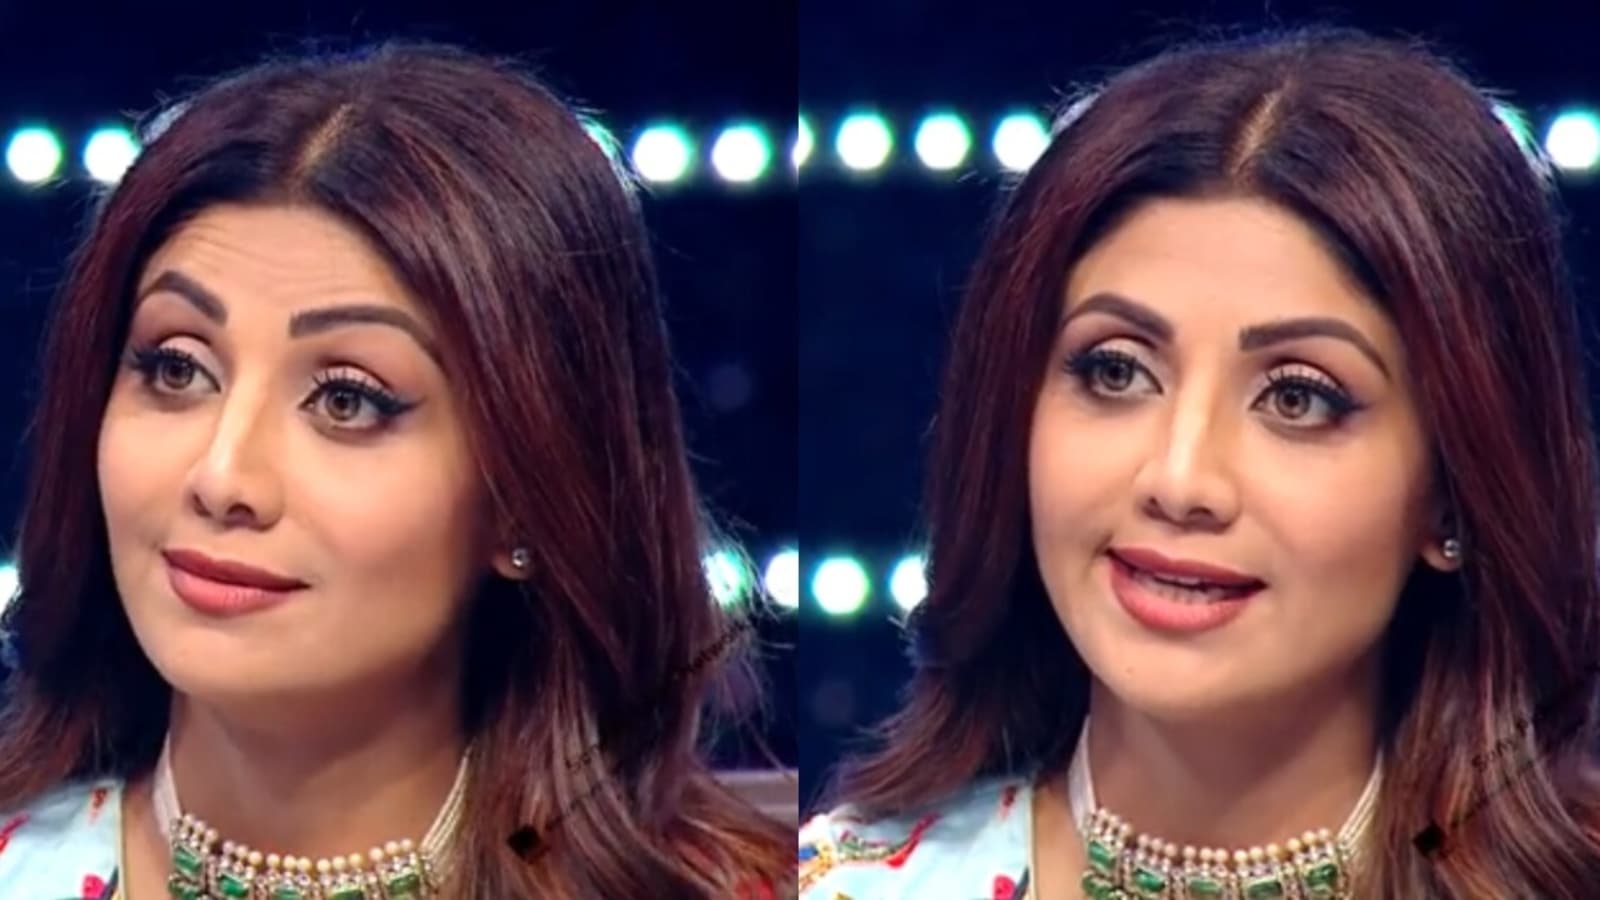 Shilpa Shetty Ki Chut - Shilpa Shetty, back on Super Dancer 4, says 'a woman still has to fight  after her husband is gone' | Bollywood - Hindustan Times